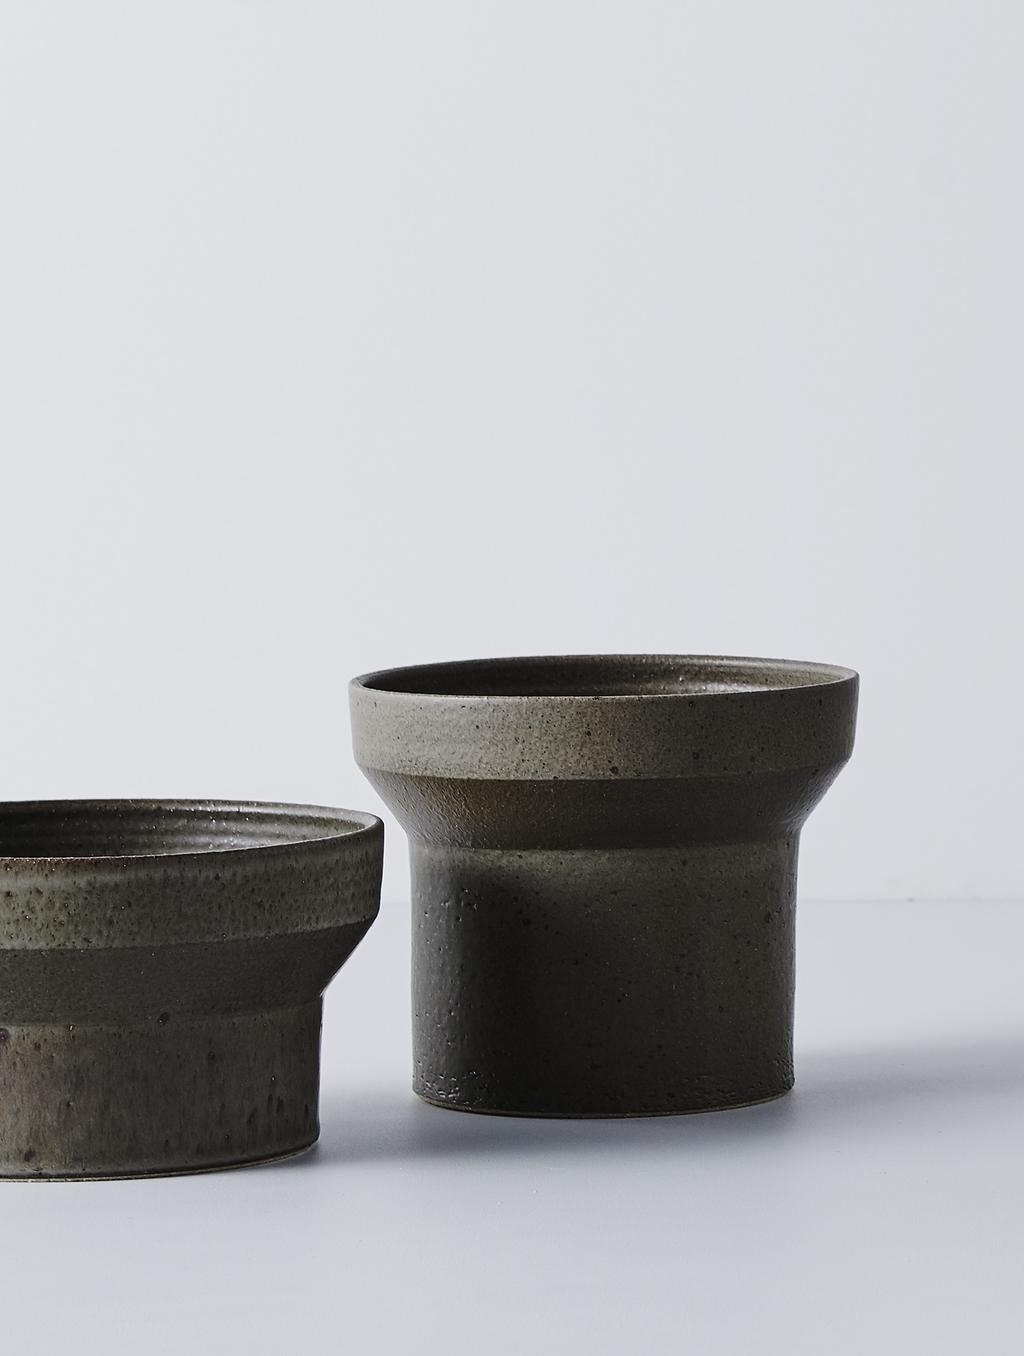 OLIVE GREEN GLAZE NEW FOR 2018 As part of the evolution of the planter range, we are introducing a new glaze finish to the range in 2018.